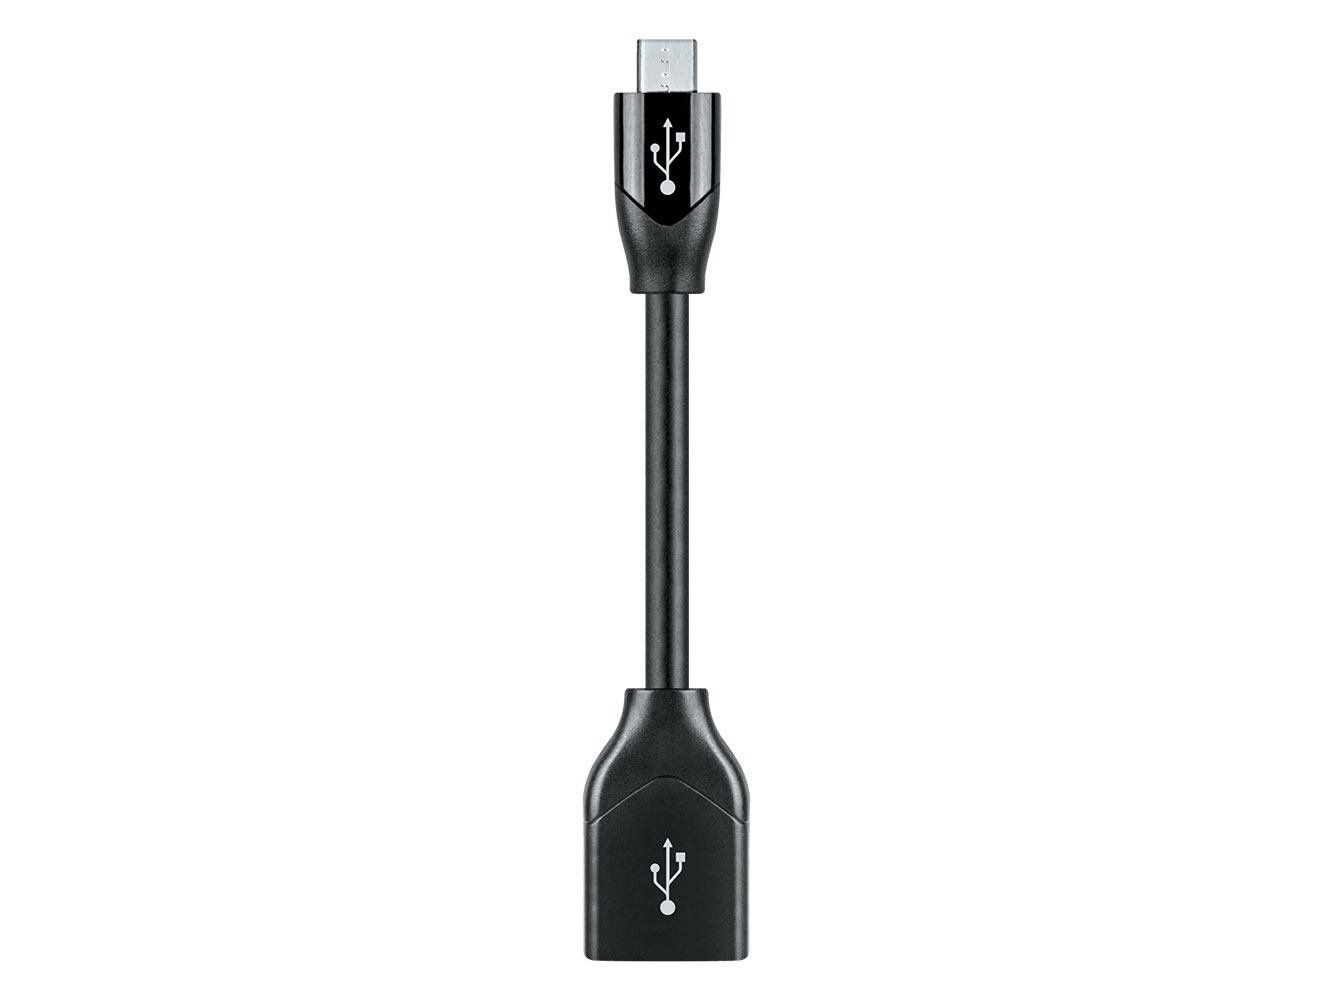 DragonTail Carbon USB Adaptor 
for Android micro USB (M) To USB A (F)